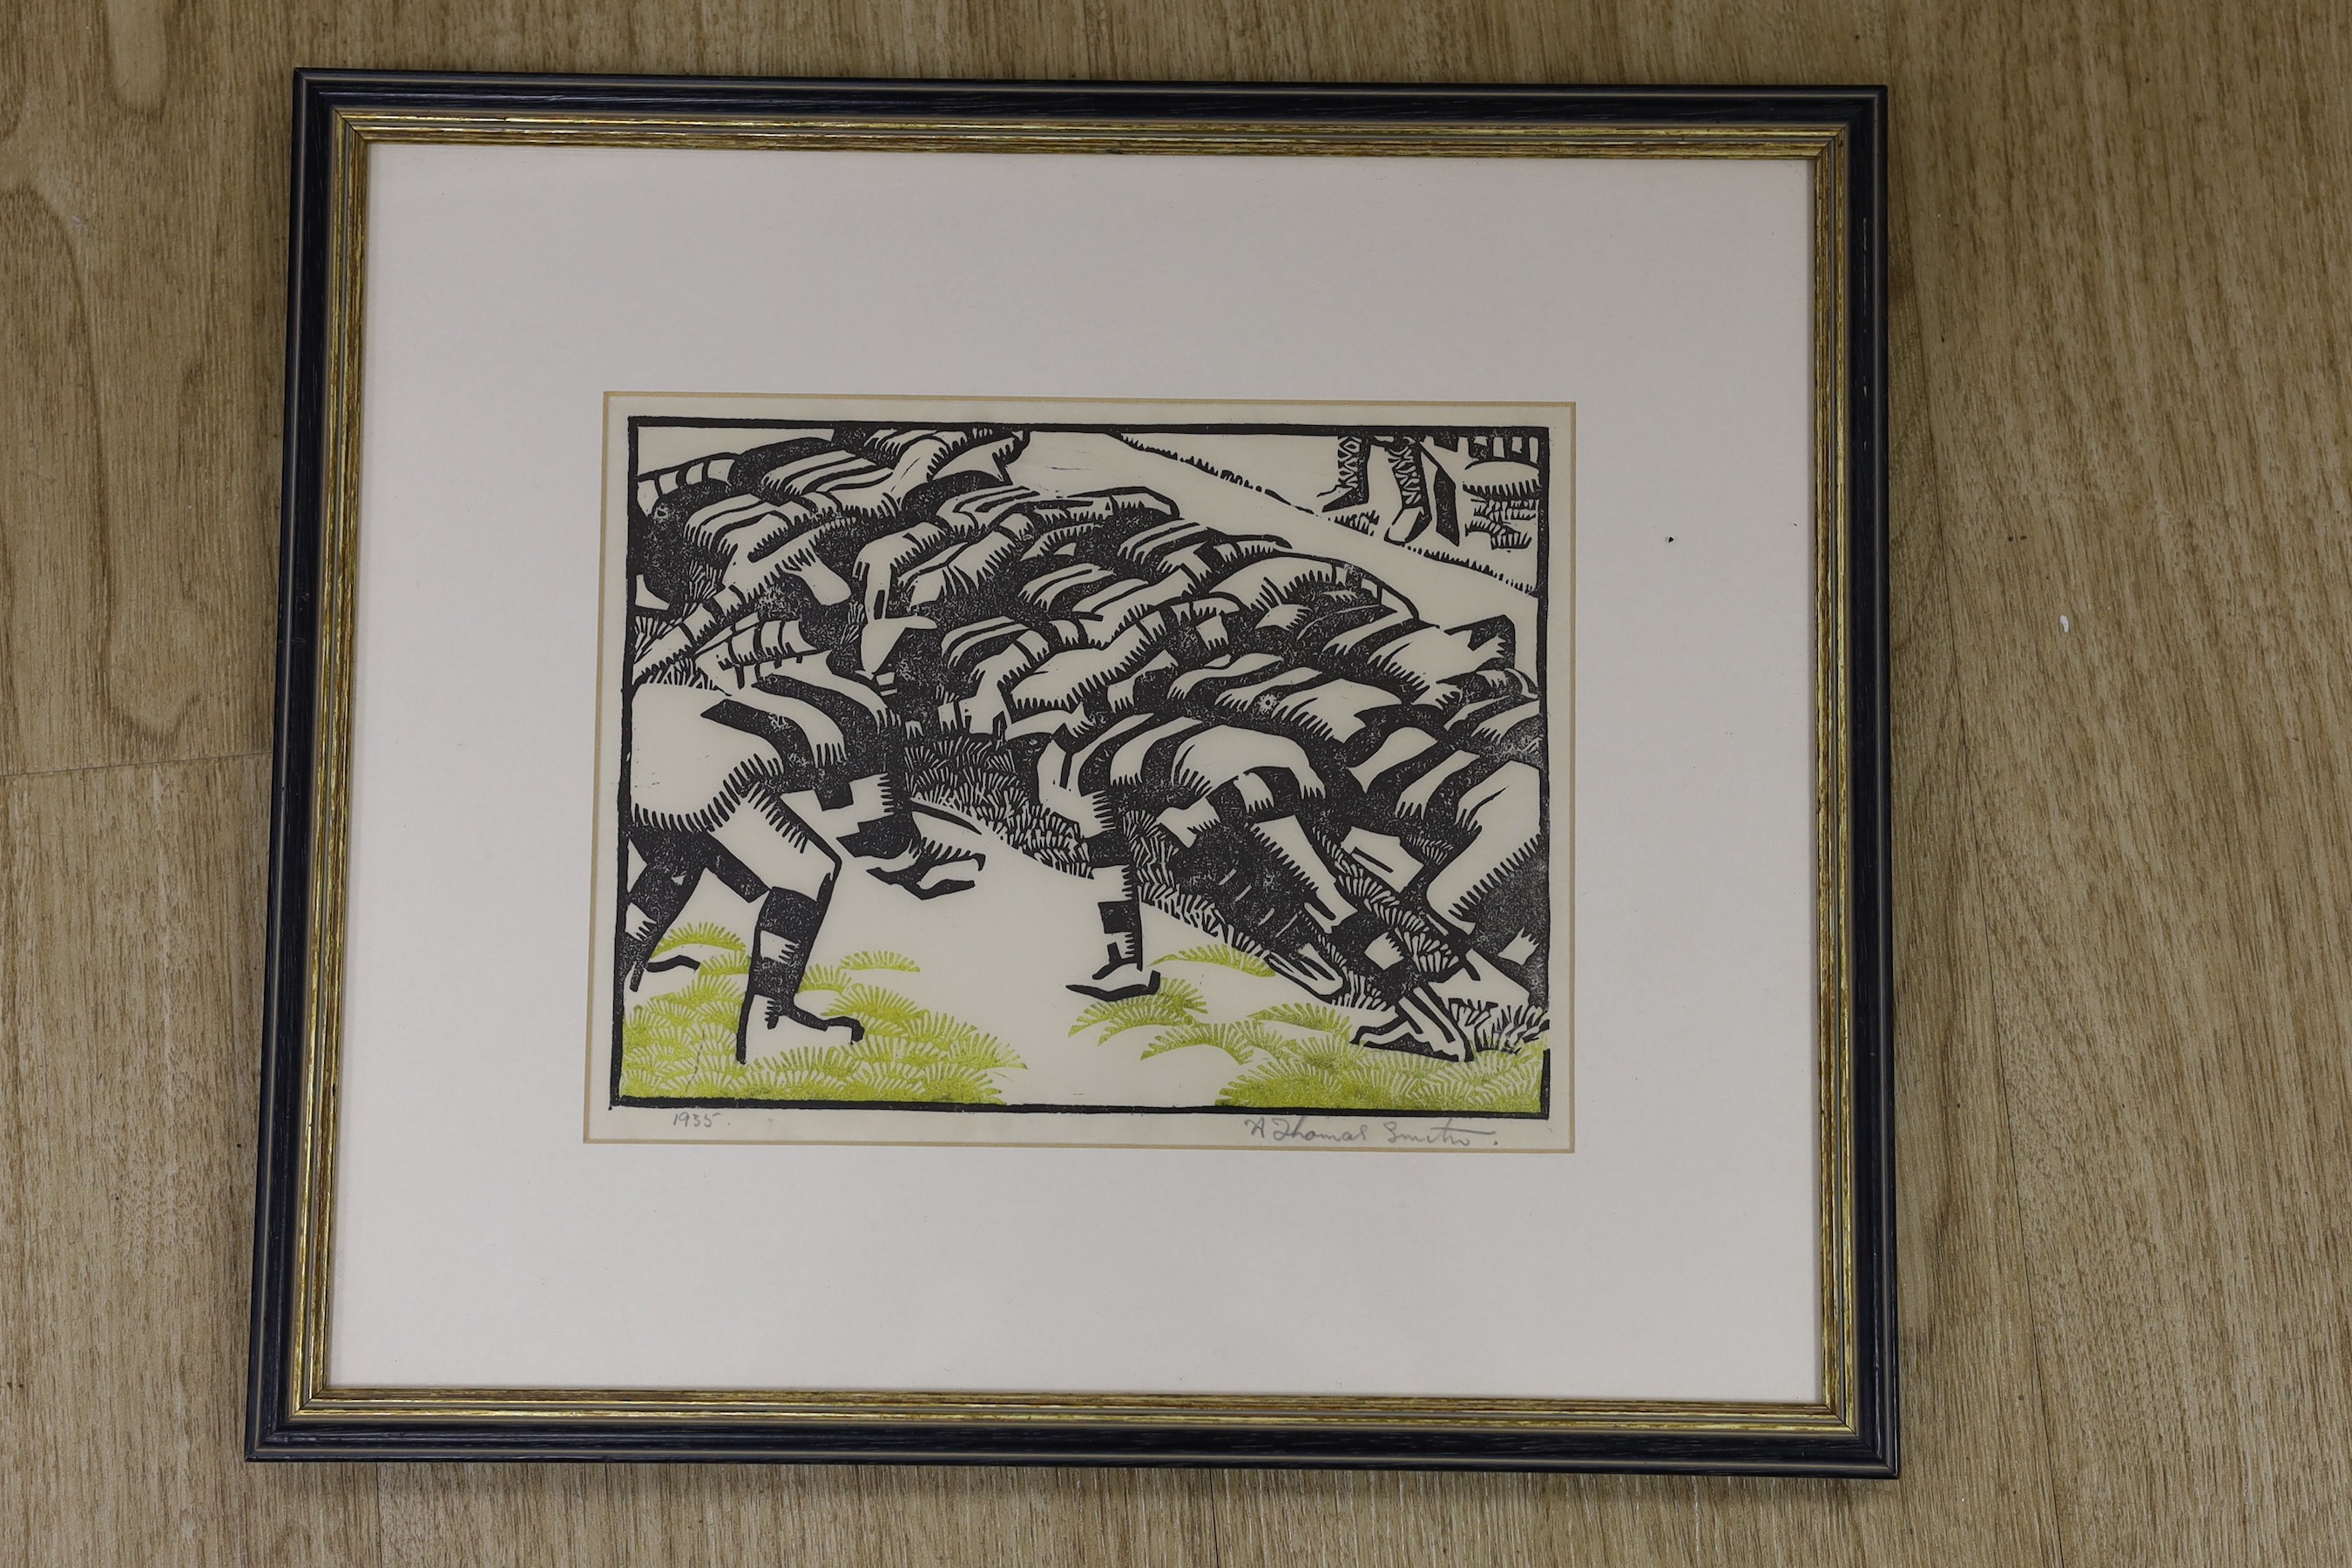 A. Thomas Smith, linocut, 'Rugby Scrum', signed in pencil and dated 1935, 15 x 20cm